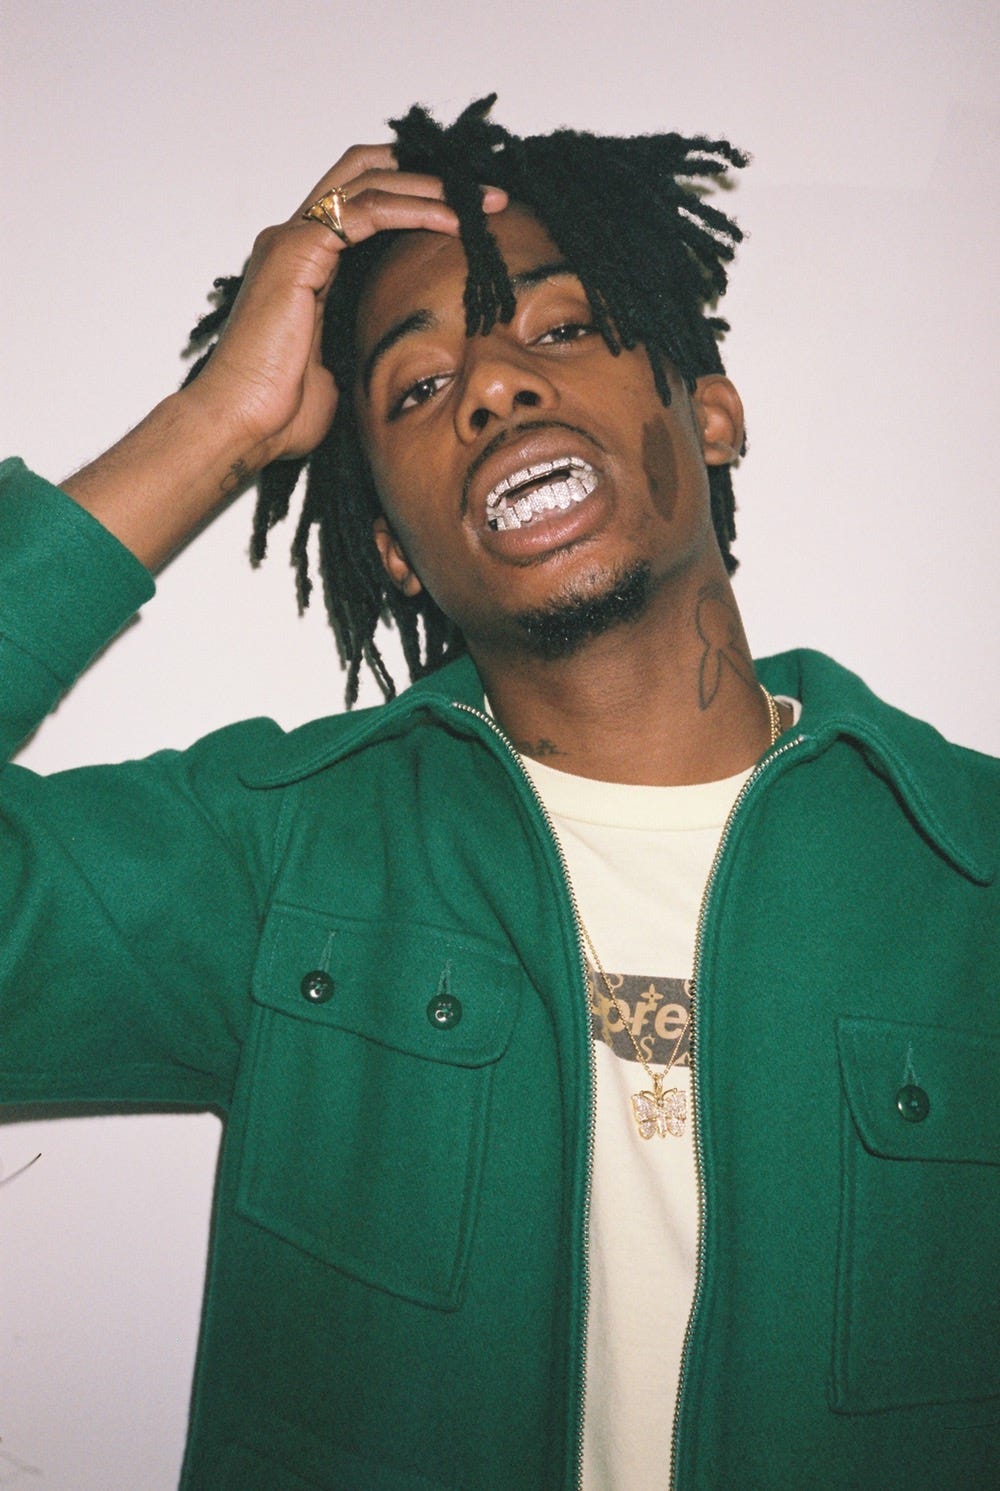 Playboi Carti: The Rapper with Everything Waiting for Him | by Kaje Collins  | Medium